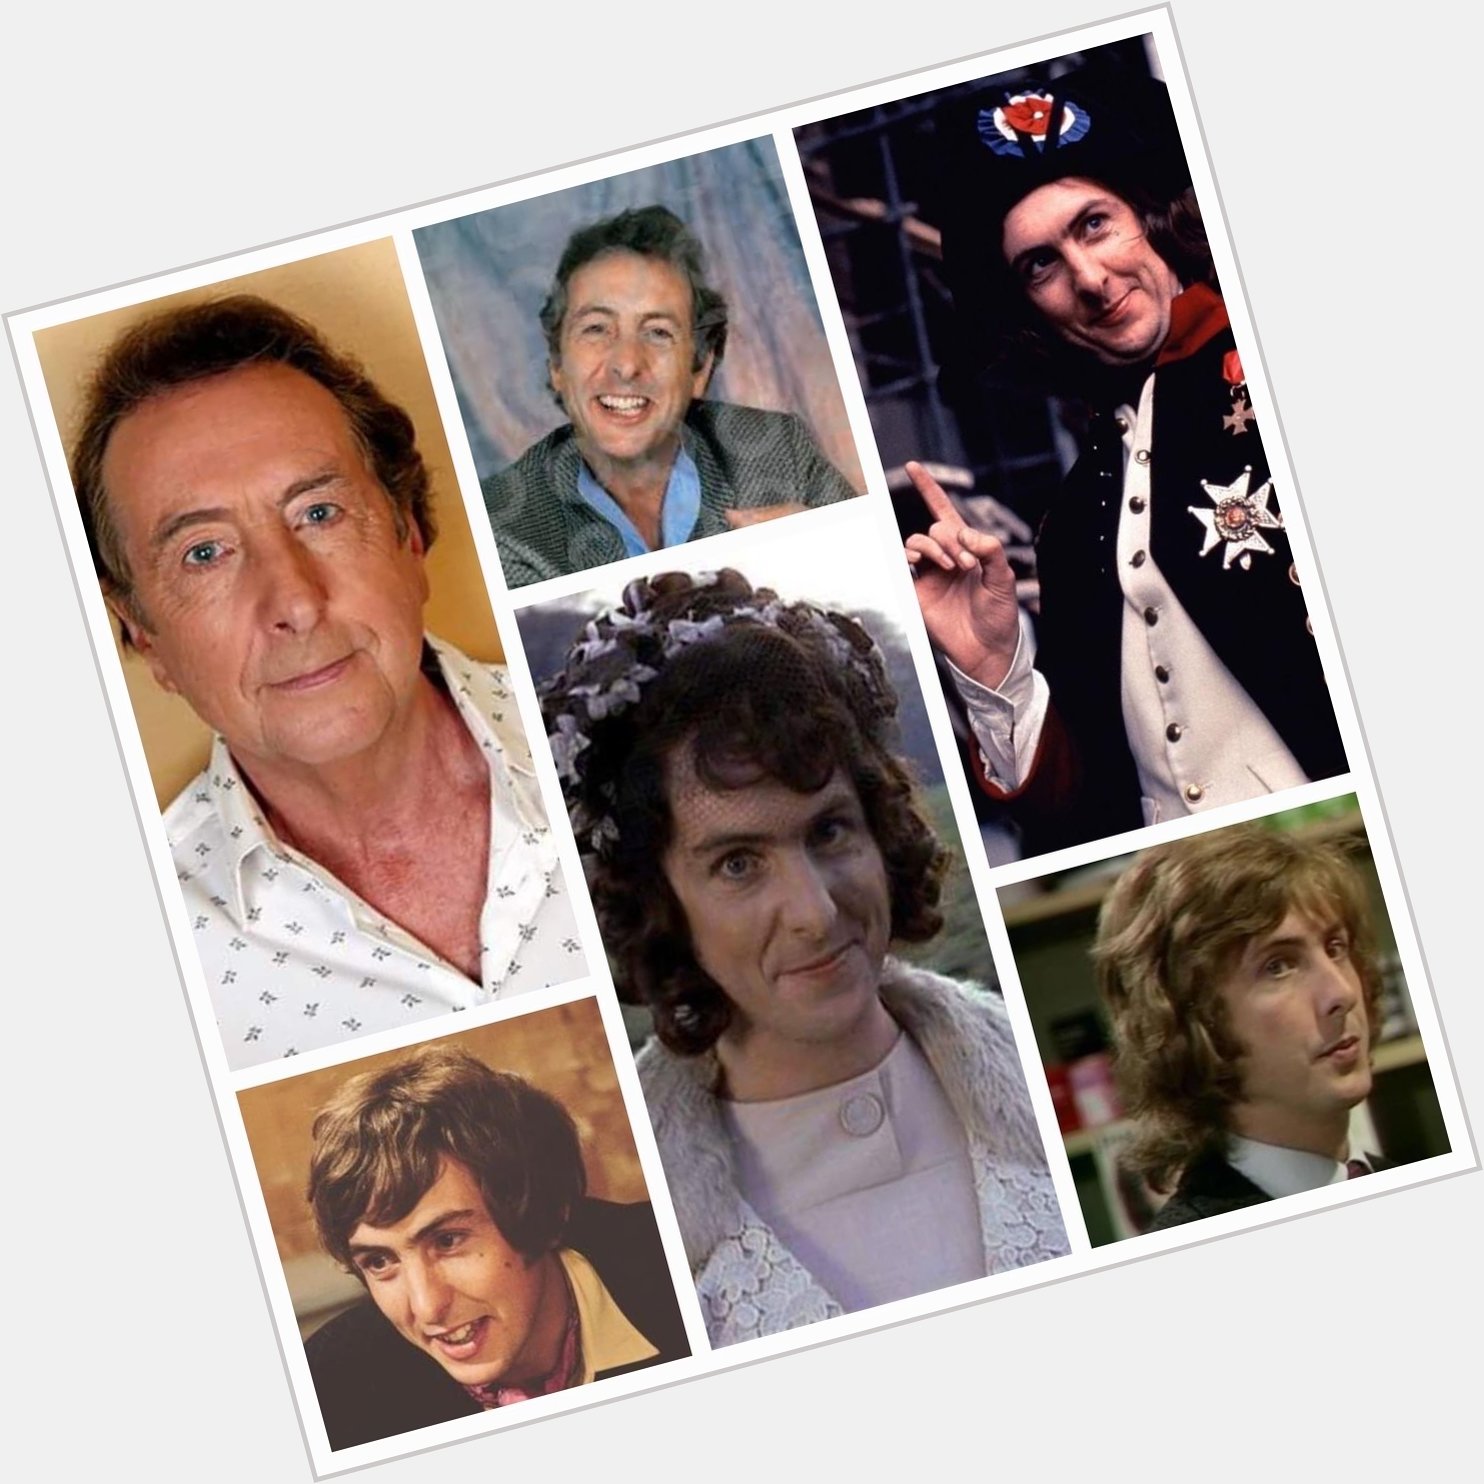 Happy 70th birthday Eric Idle!
The British icon and legend from Monty Phyton! 